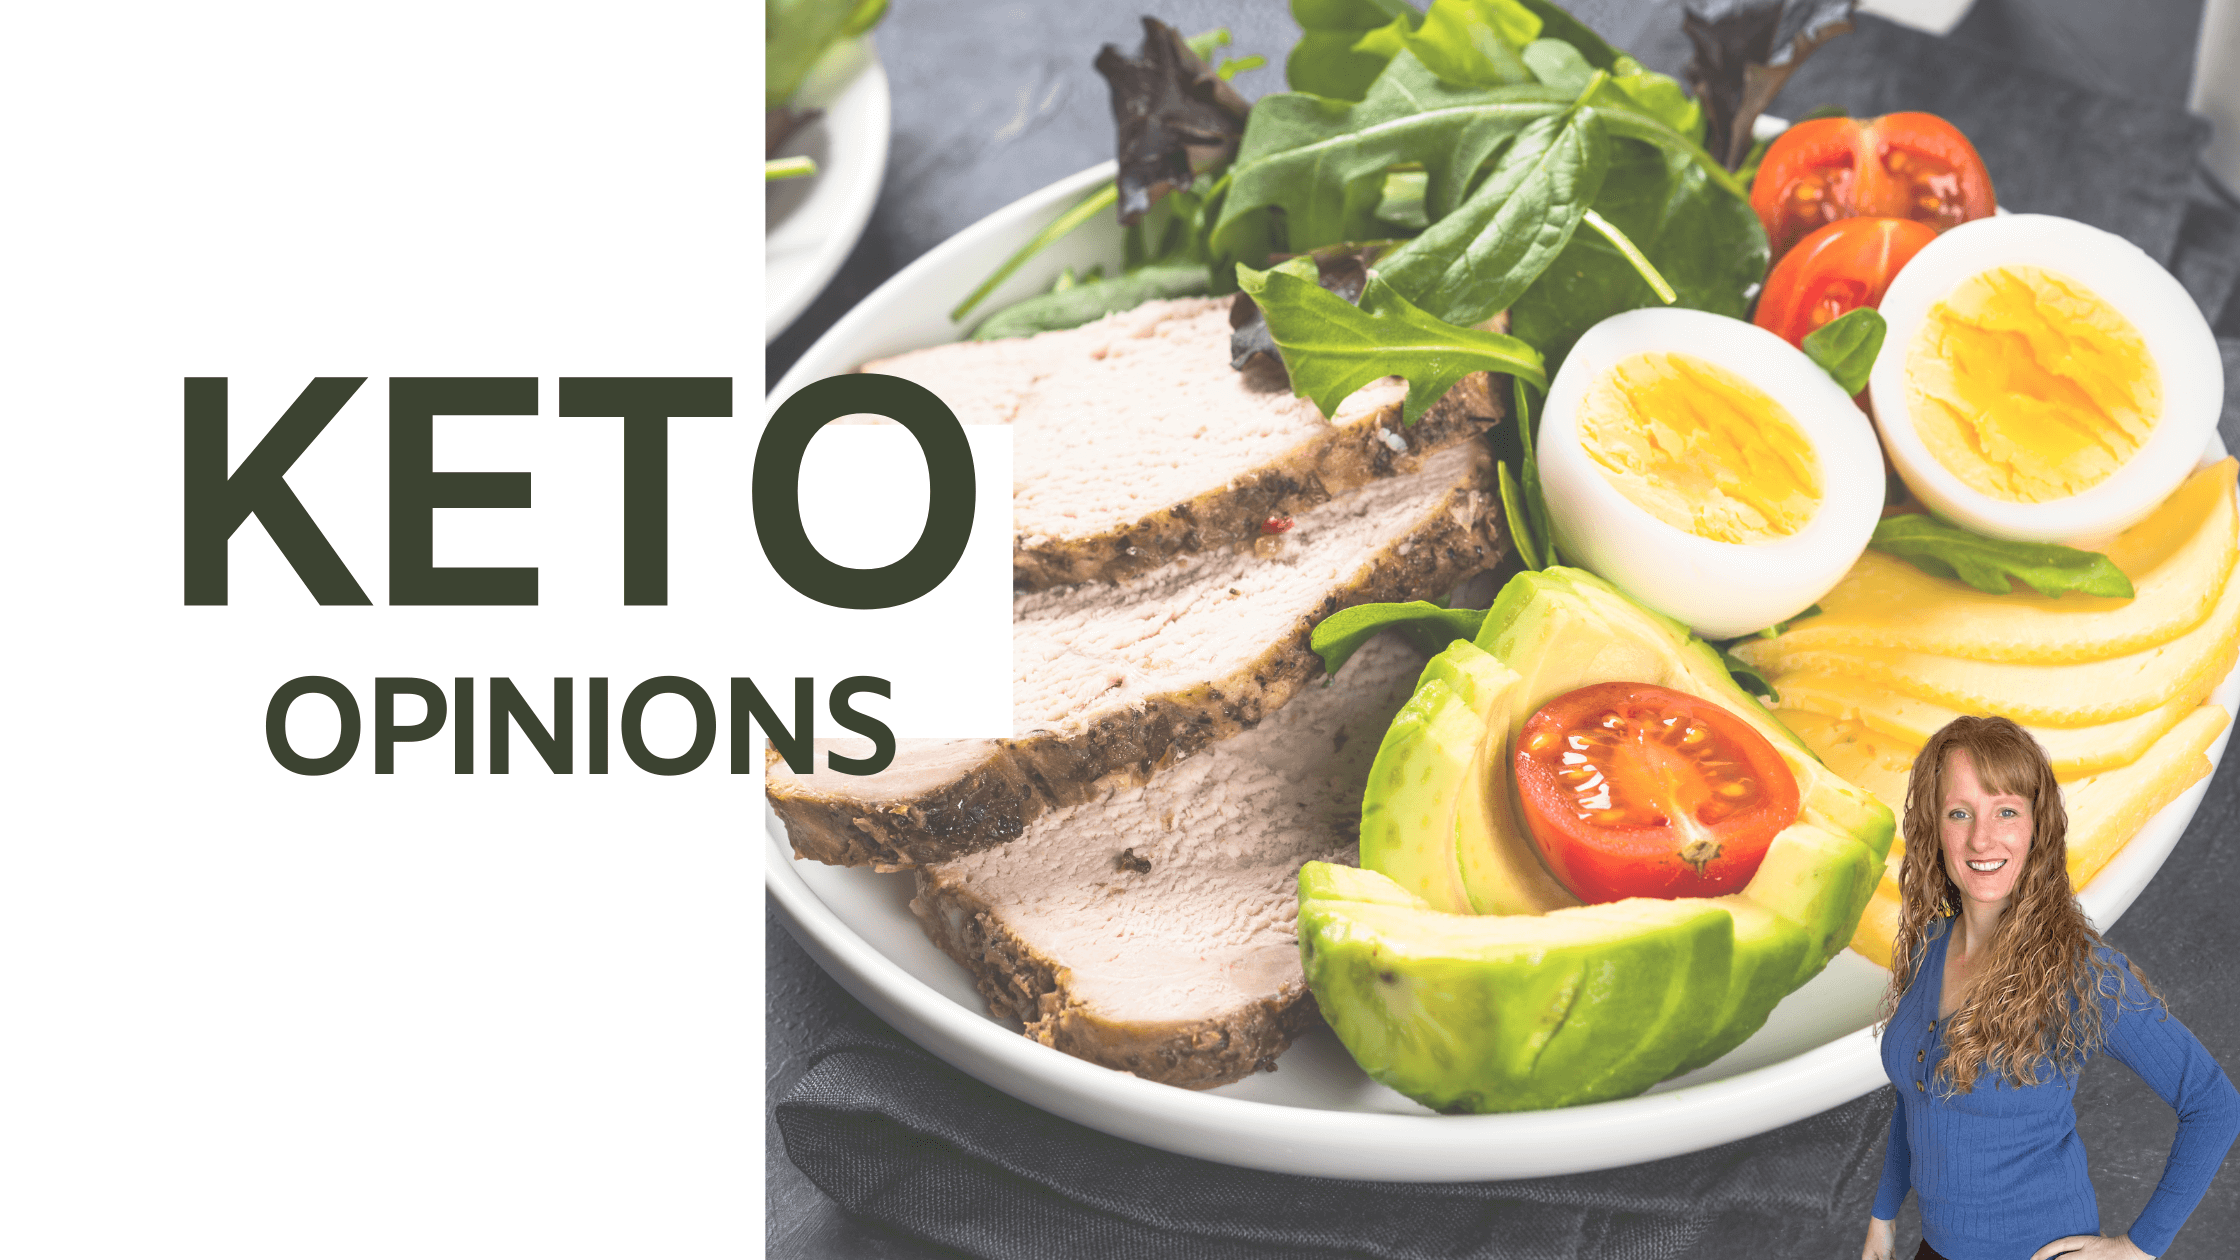 Functional Nutritionist Andrea Nicholson shares her views on the ketogenic diet on the Holistic Health Bites podcast